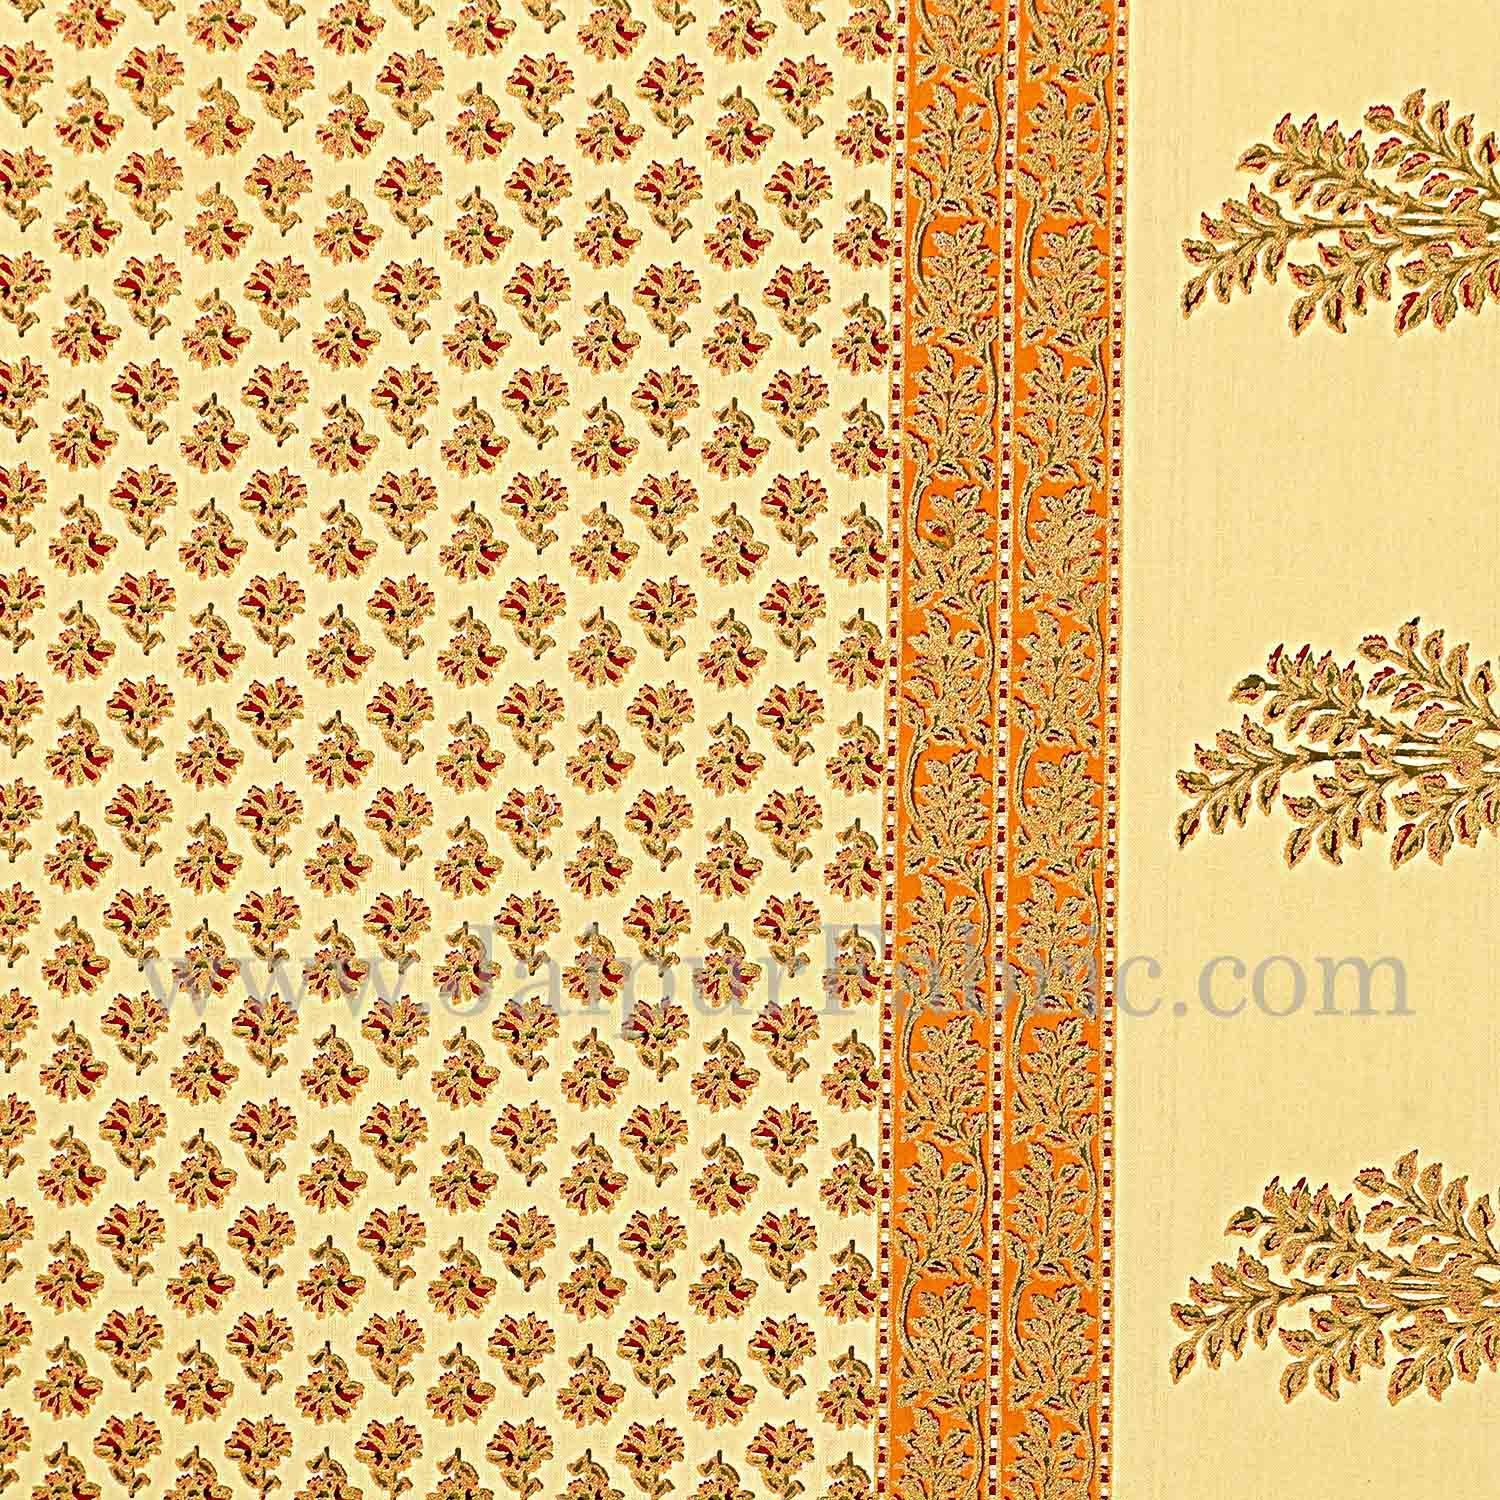 Orange Border Cream Base With booti Pattern With Golden Print Super Fine Cotton Double Bed Sheet